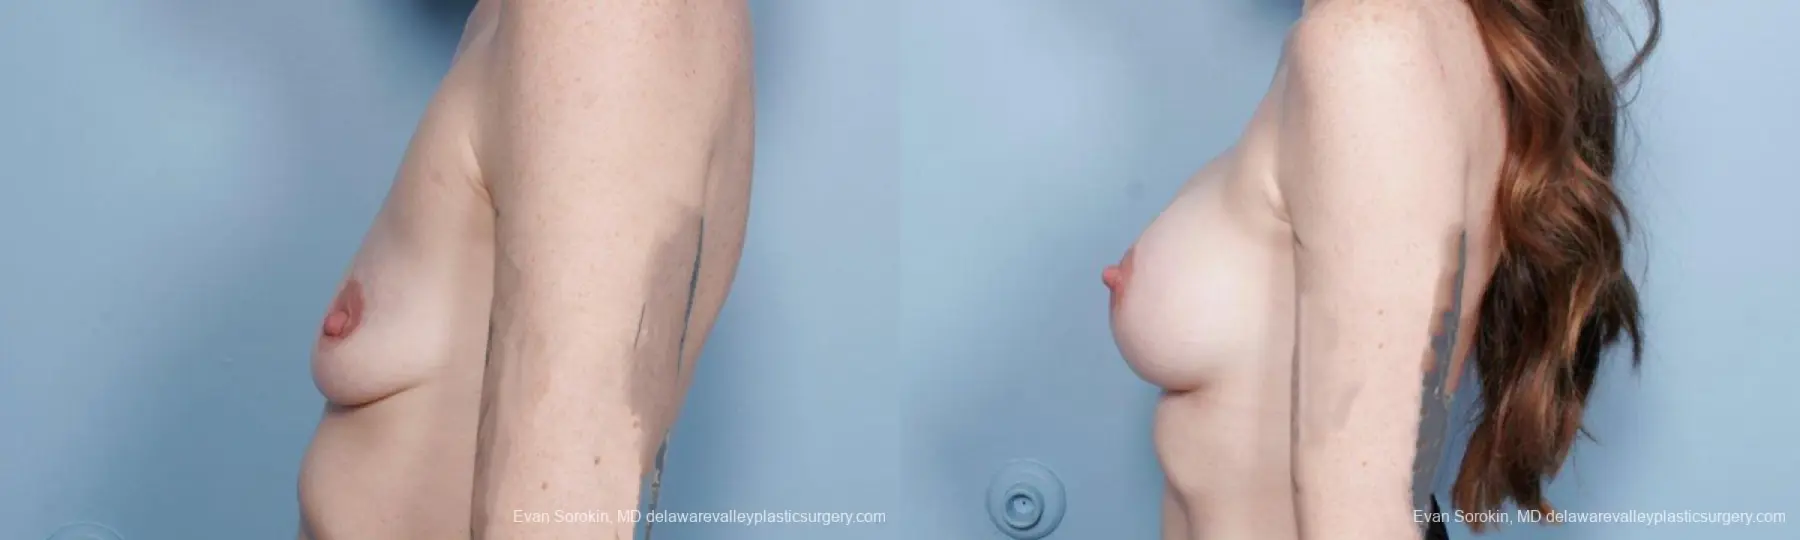 Philadelphia Breast Augmentation 8649 - Before and After 5